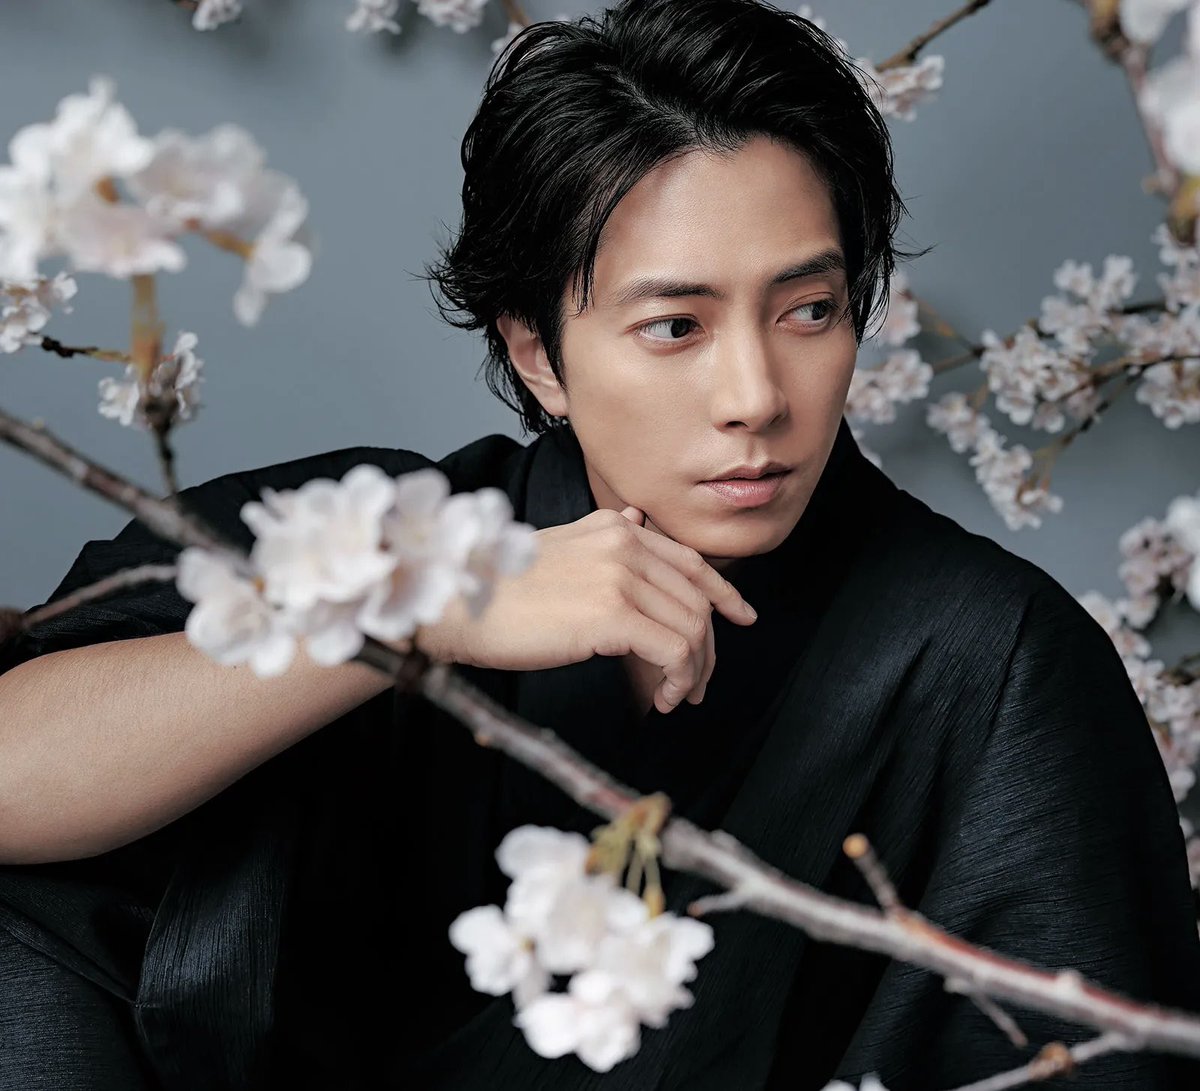 2024/05/03 Another Tomo magazine pictures (Kimono Version) and interview from 「美ST(ビスト)」 Official Website. Sophisticated look in all black Kimono. 😍 
Link Kimono version : be-story.jp/people/84705/
#山下智久